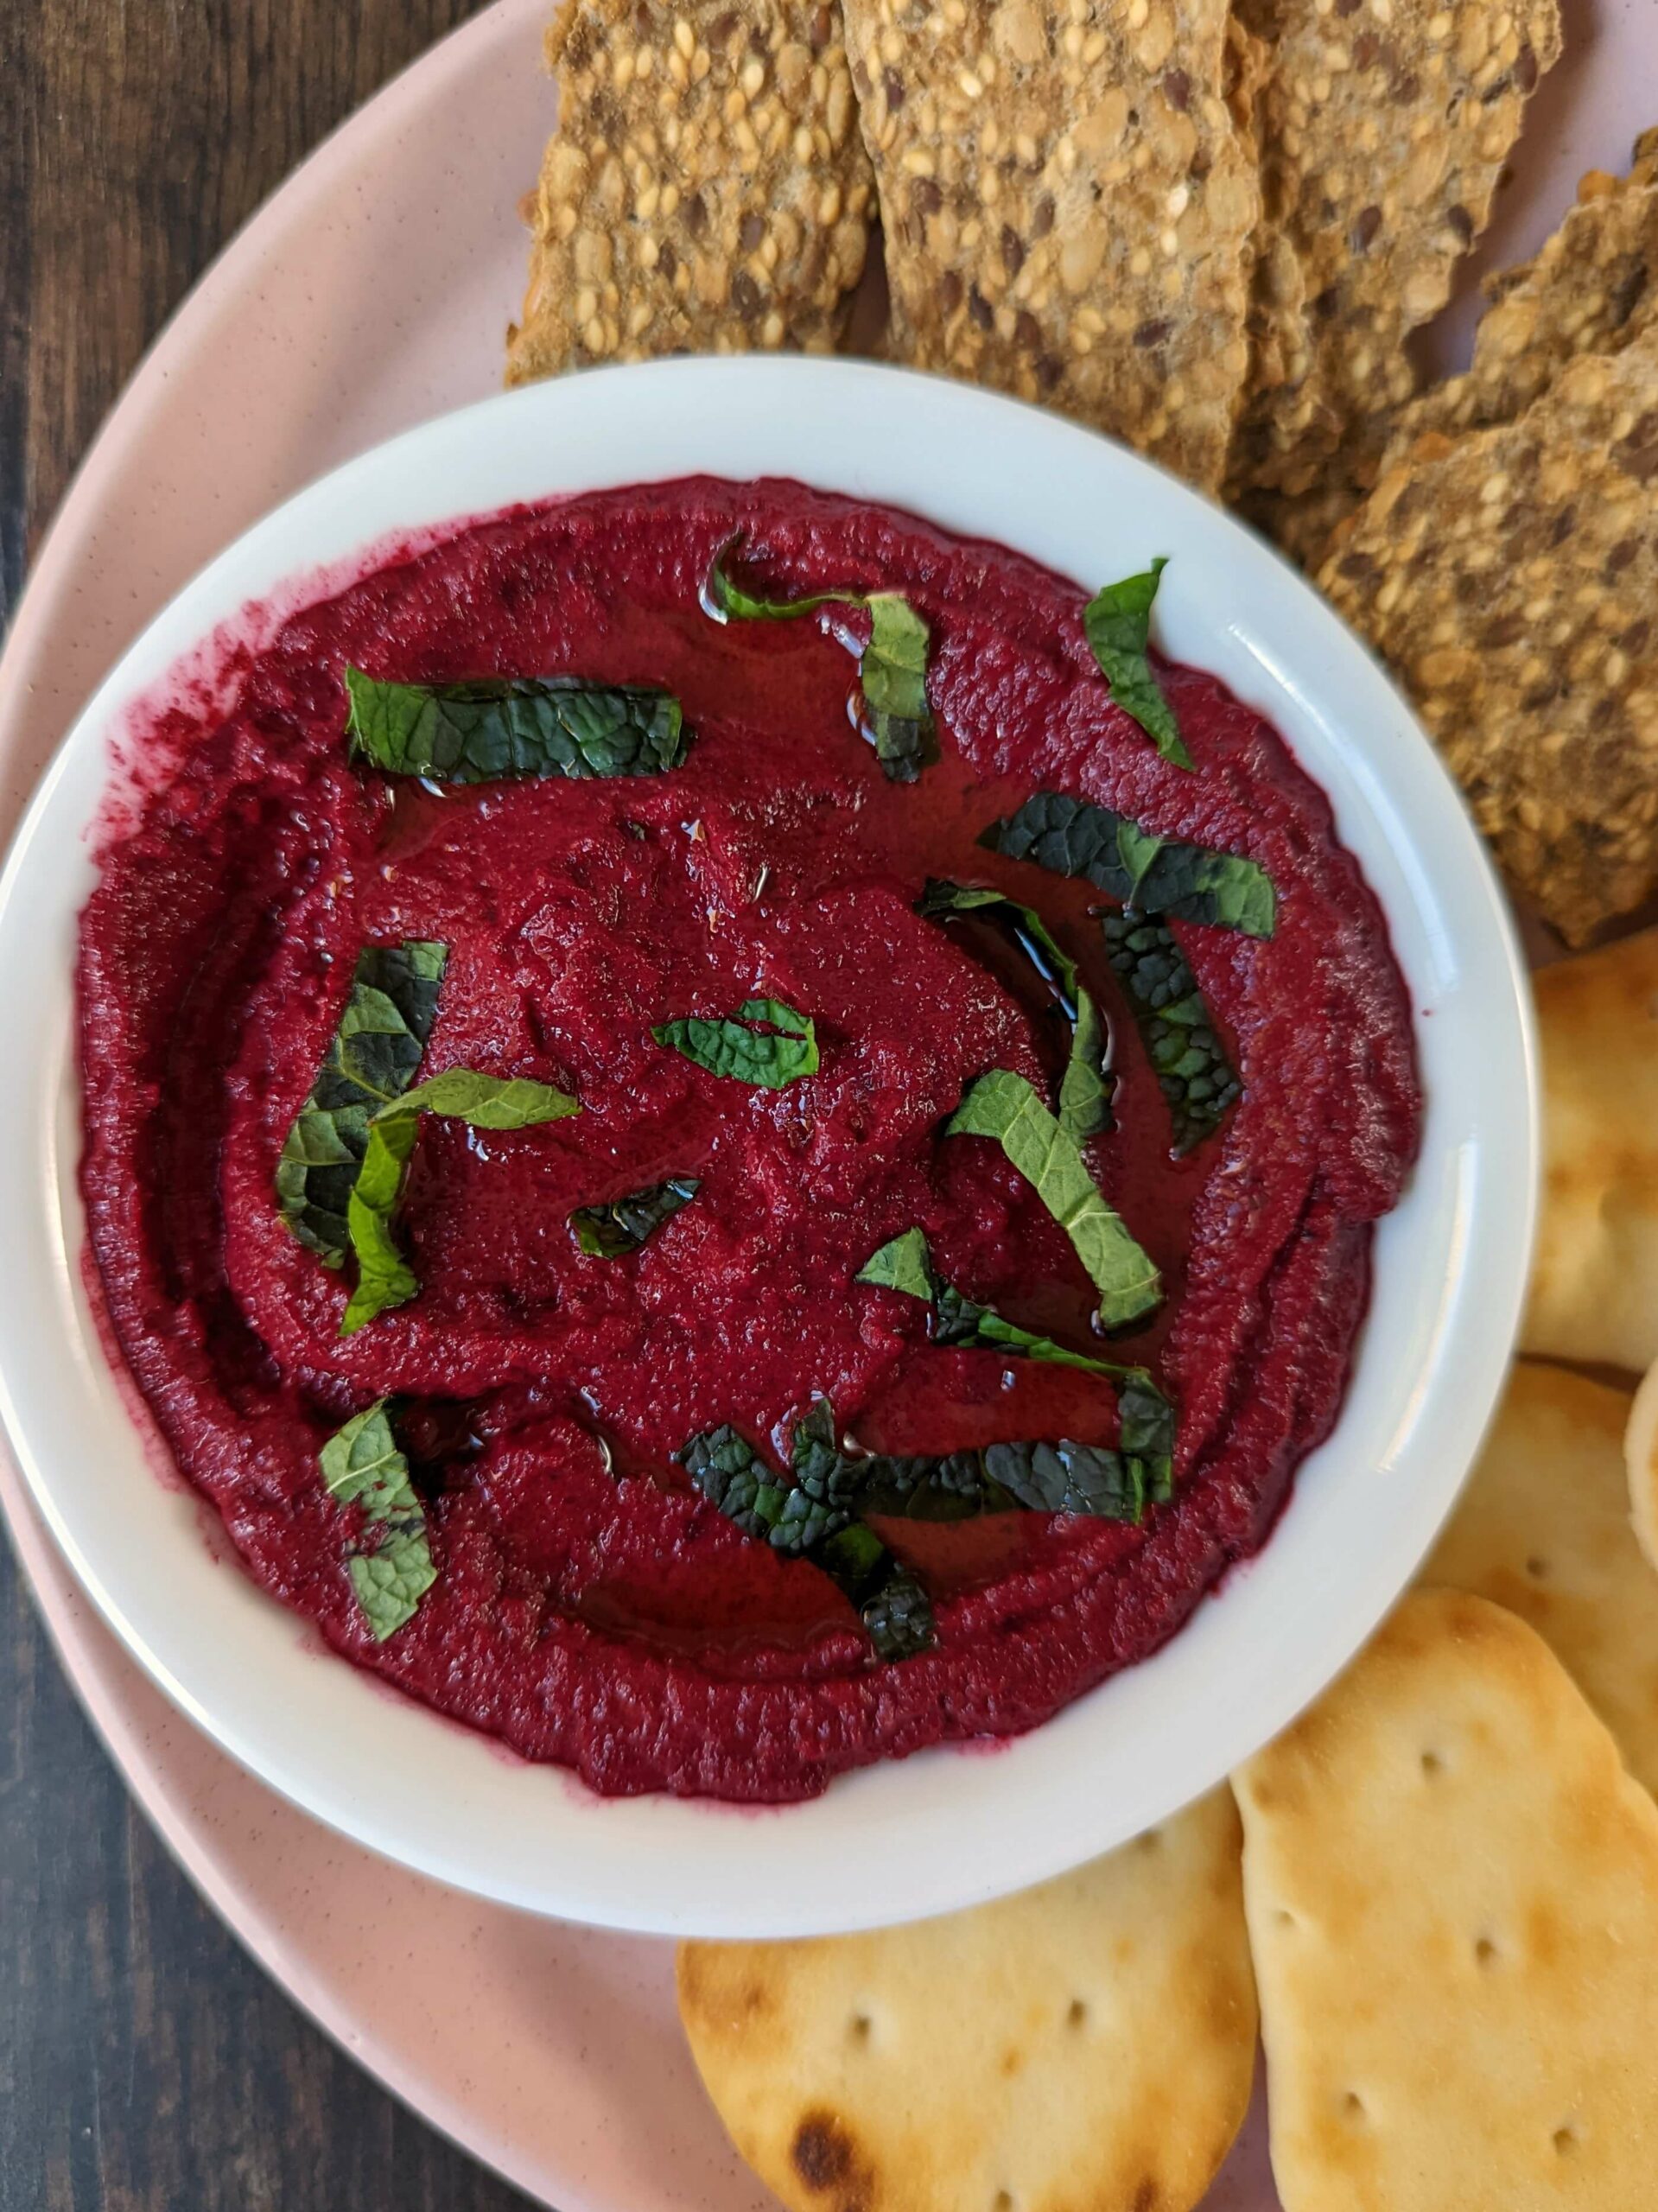 Beetroot dip surrounded by crackers and naan bites.